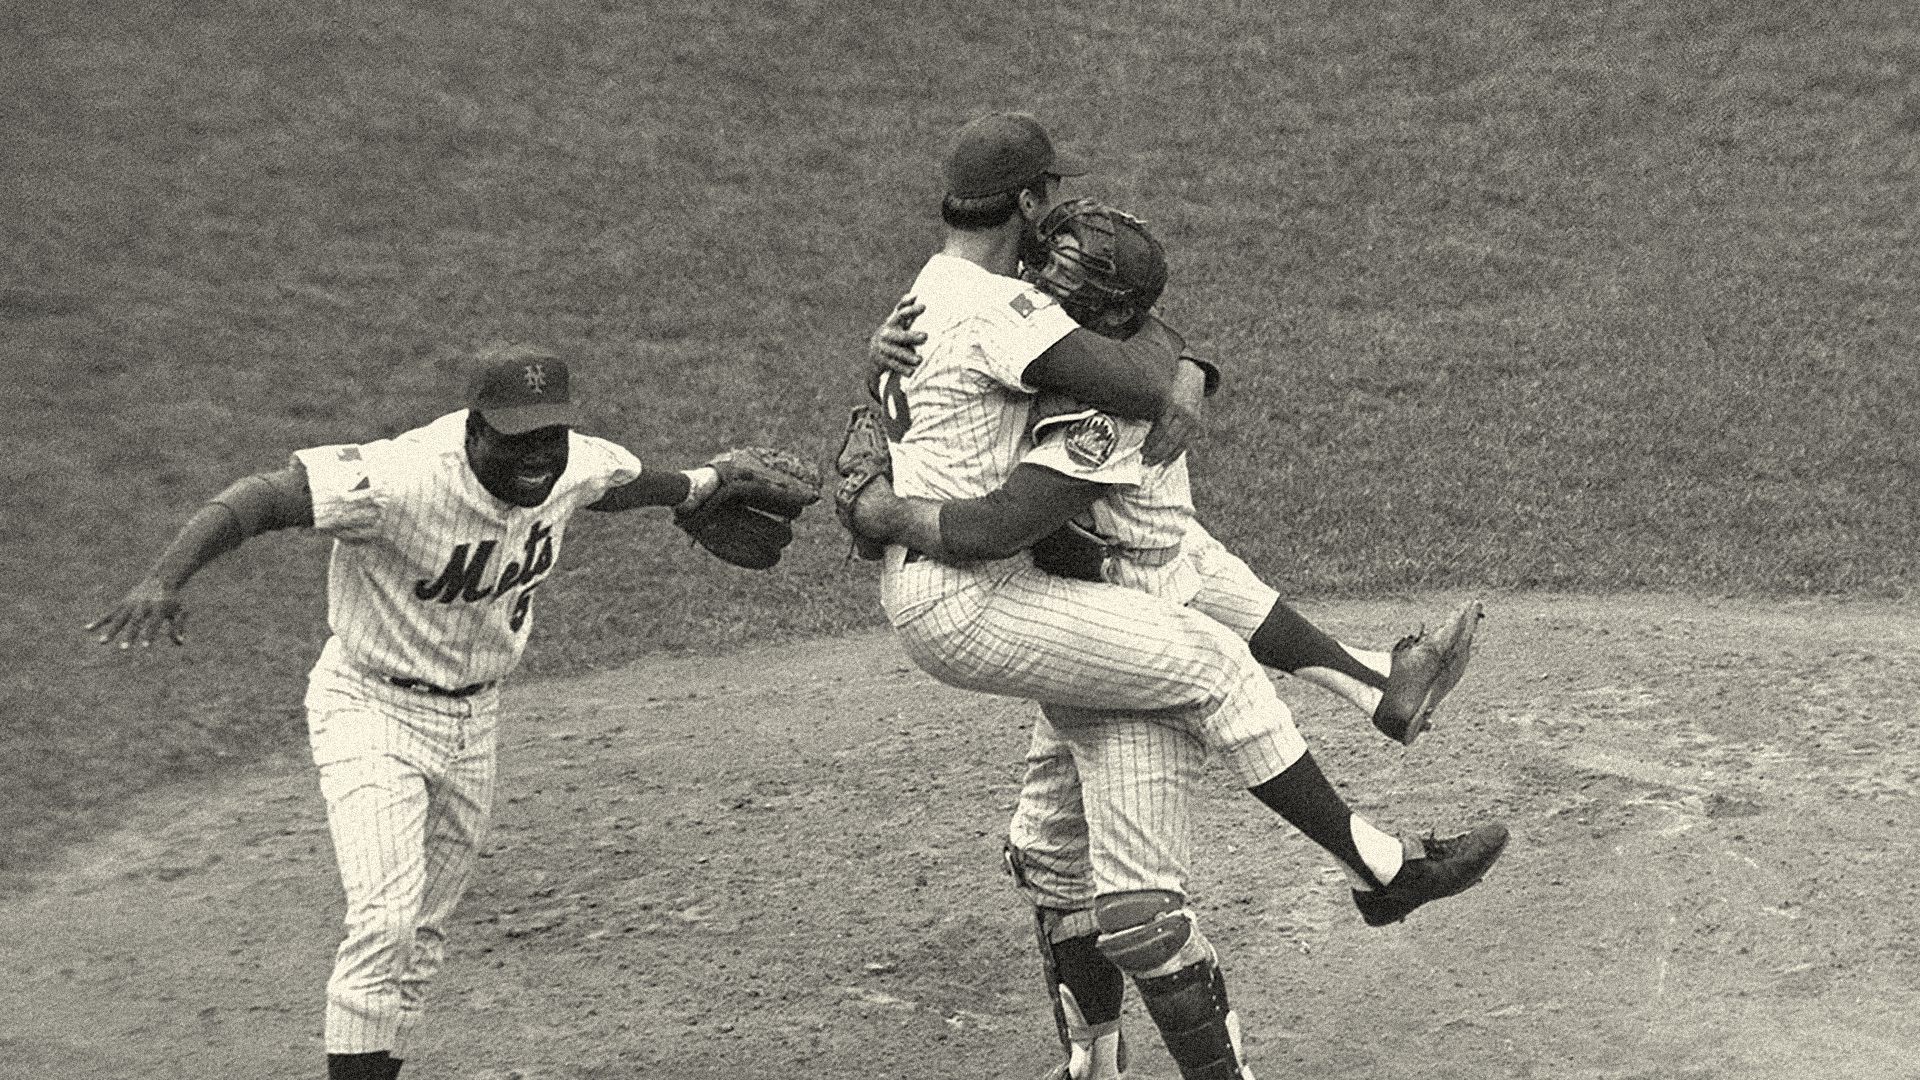 New York Mets players celebrate after winning the 1969 World Series. Photo Courtesy of MLB.com